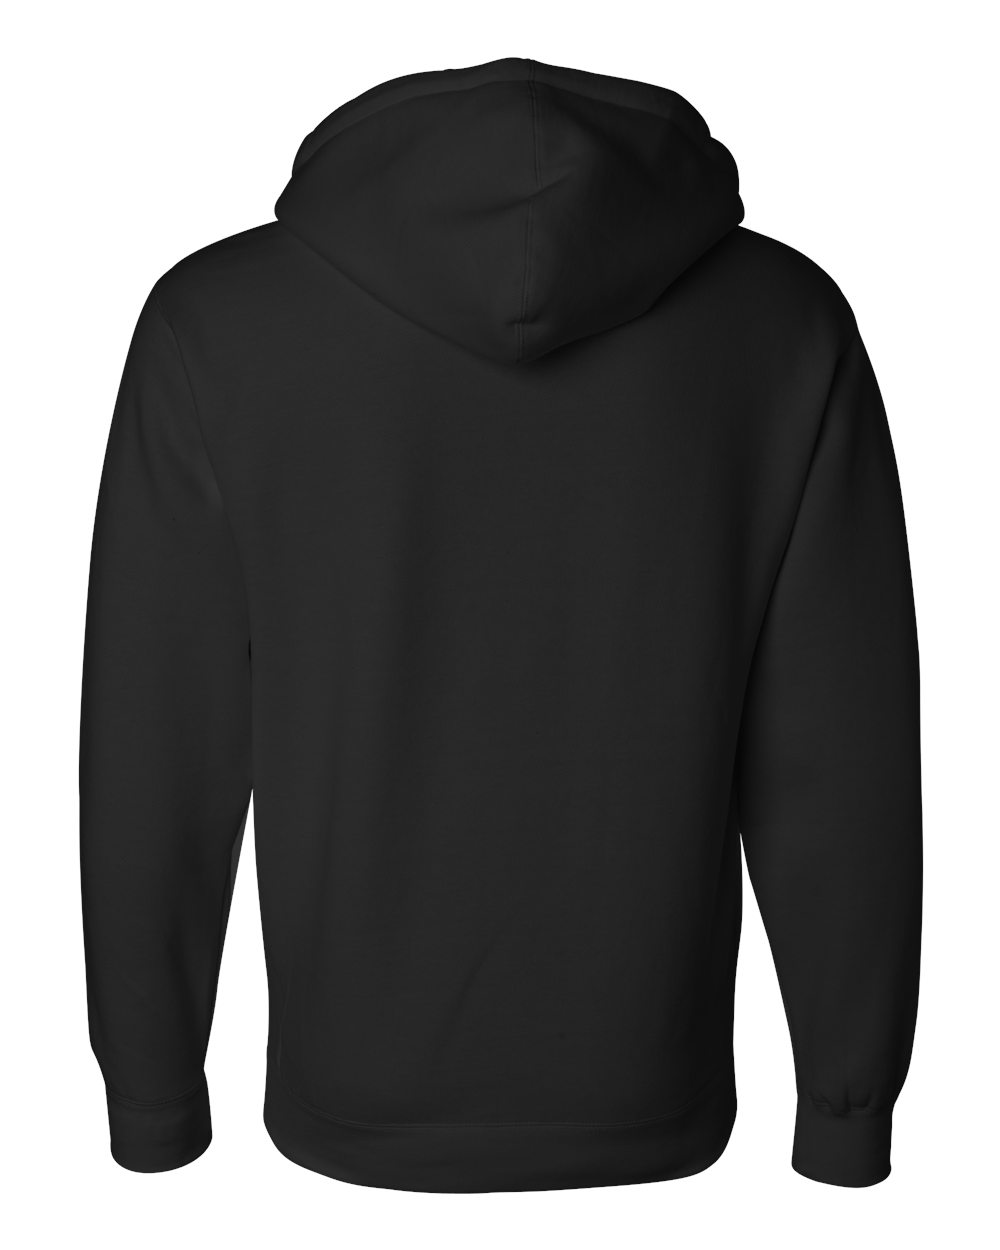 fully customizable independent heavyweight hoodie sweater pullover in multiple sizes and colors